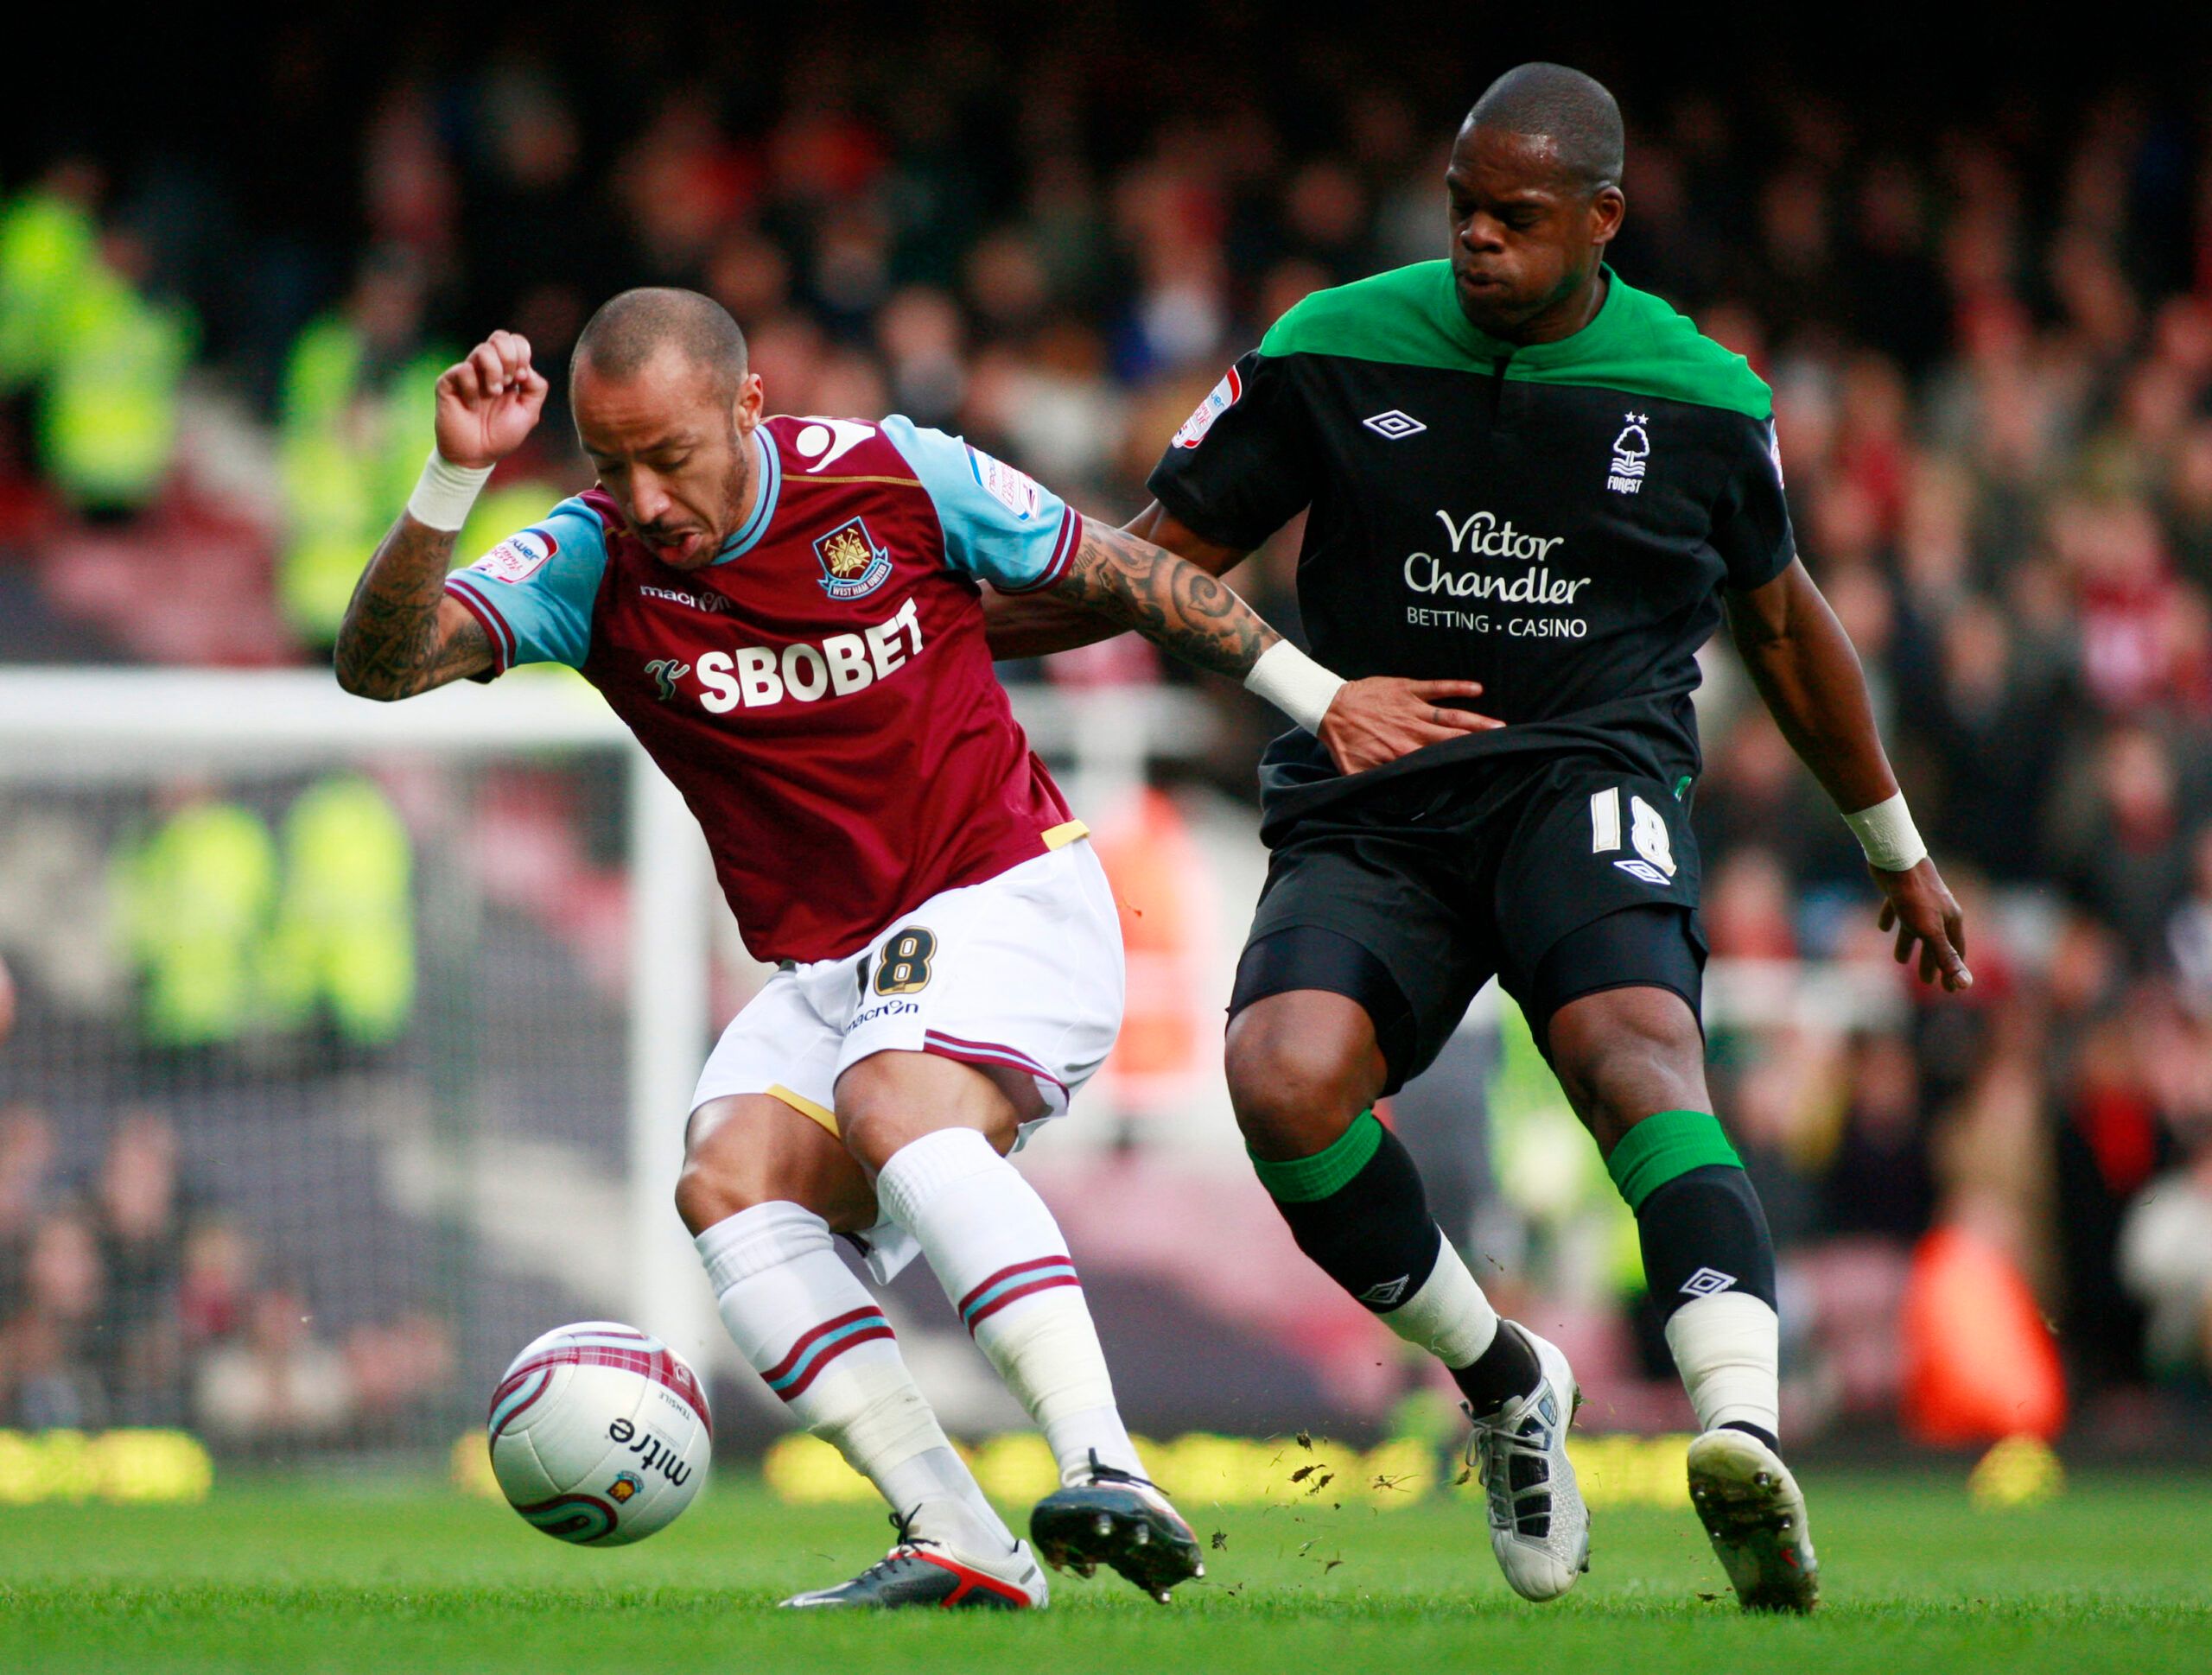 Football - West Ham United v Nottingham Forest npower Football League Championship - Upton Park - 21/1/12 
West Ham United's Julien Faubert with Marlon Harewood - Nottingham Forest n 
Mandatory Credit: Action Images / Lee Mills 
Livepic 
EDITORIAL USE ONLY. No use with unauthorized audio, video, data, fixture lists, club/league logos or live services. Online in-match use limited to 45 images, no video emulation. No use in betting, games or single club/league/player publications.  Please contact 